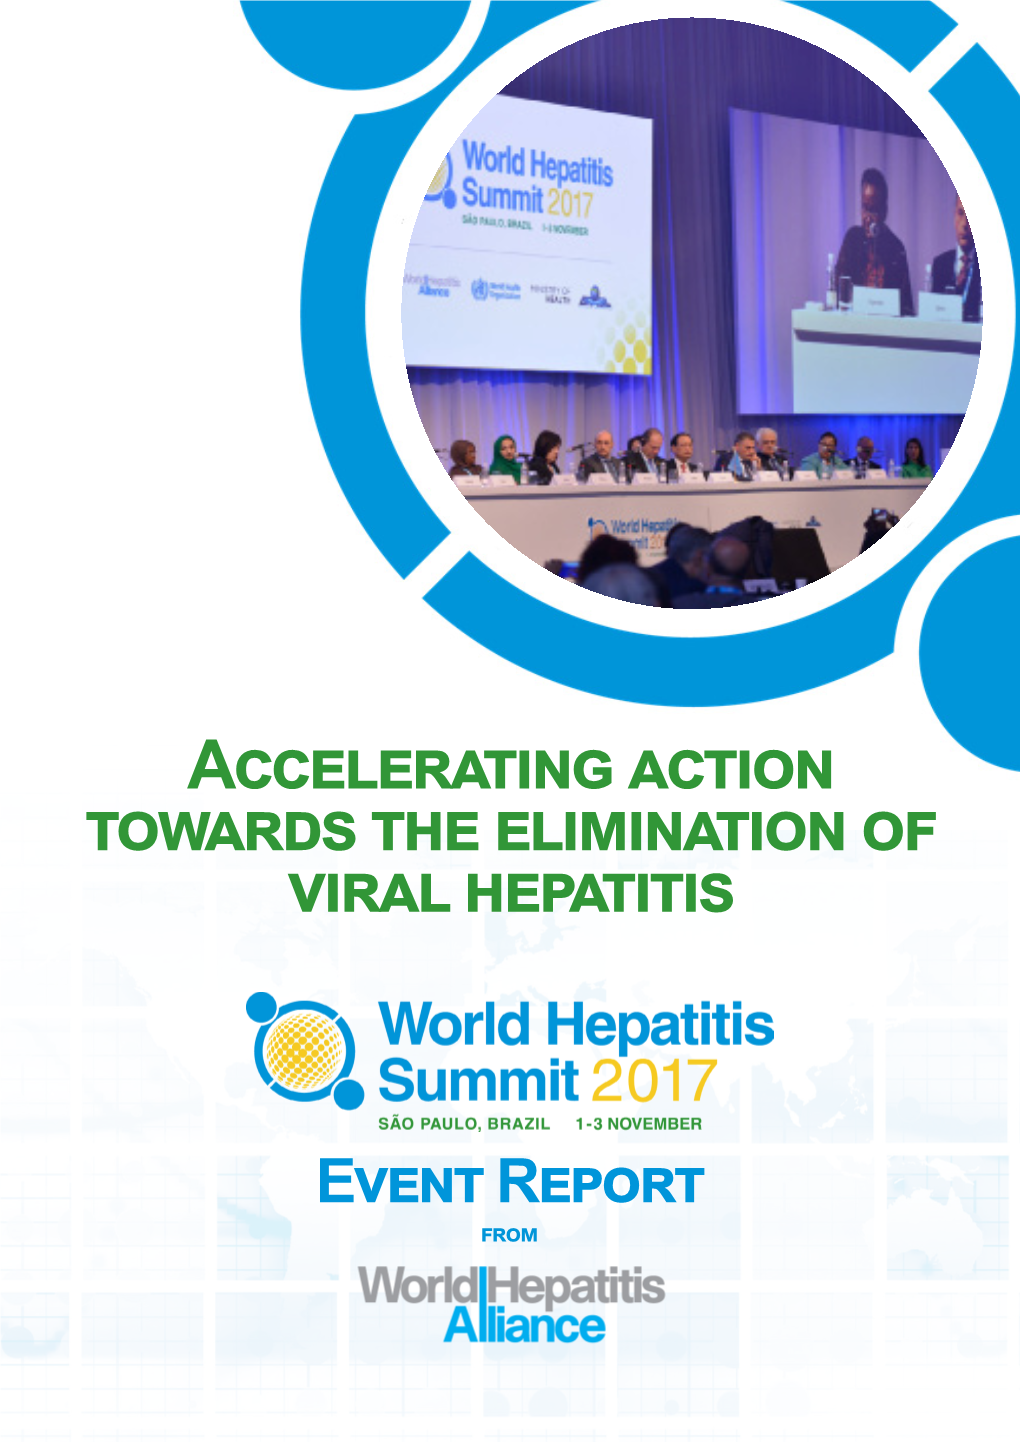 Accelerating Action Towards the Elimination of Viral Hepatitis